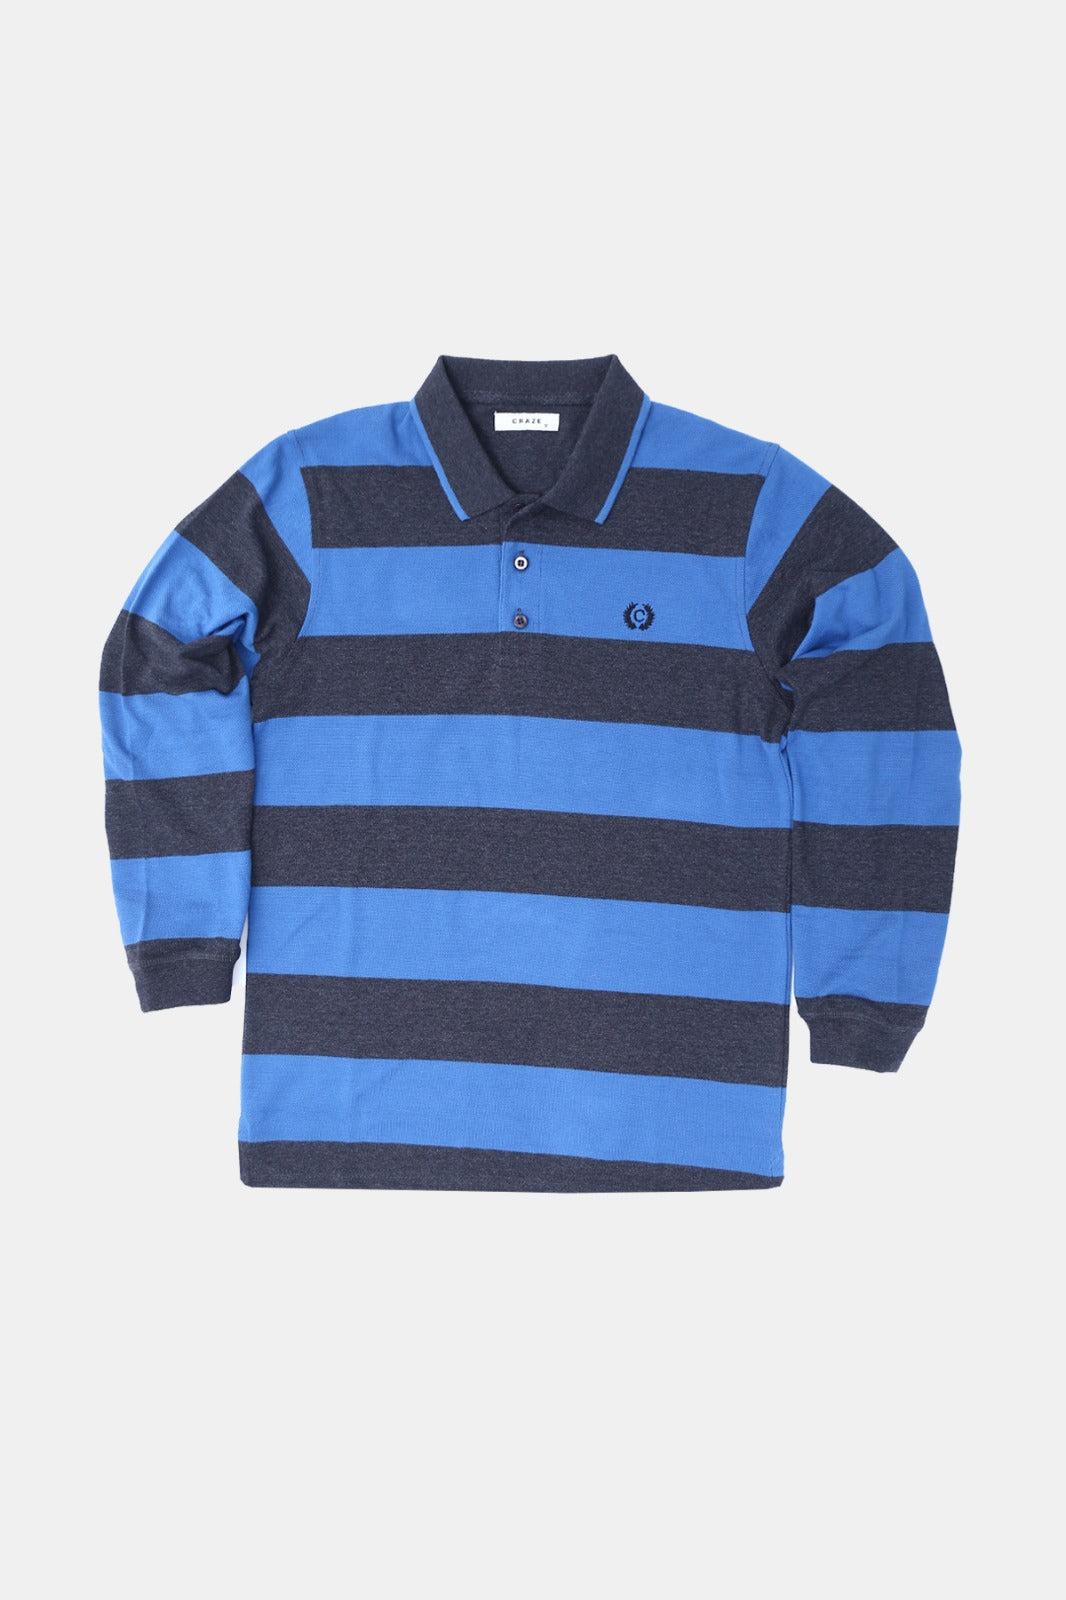 Blue and Grey striped Full Sleeves Polo